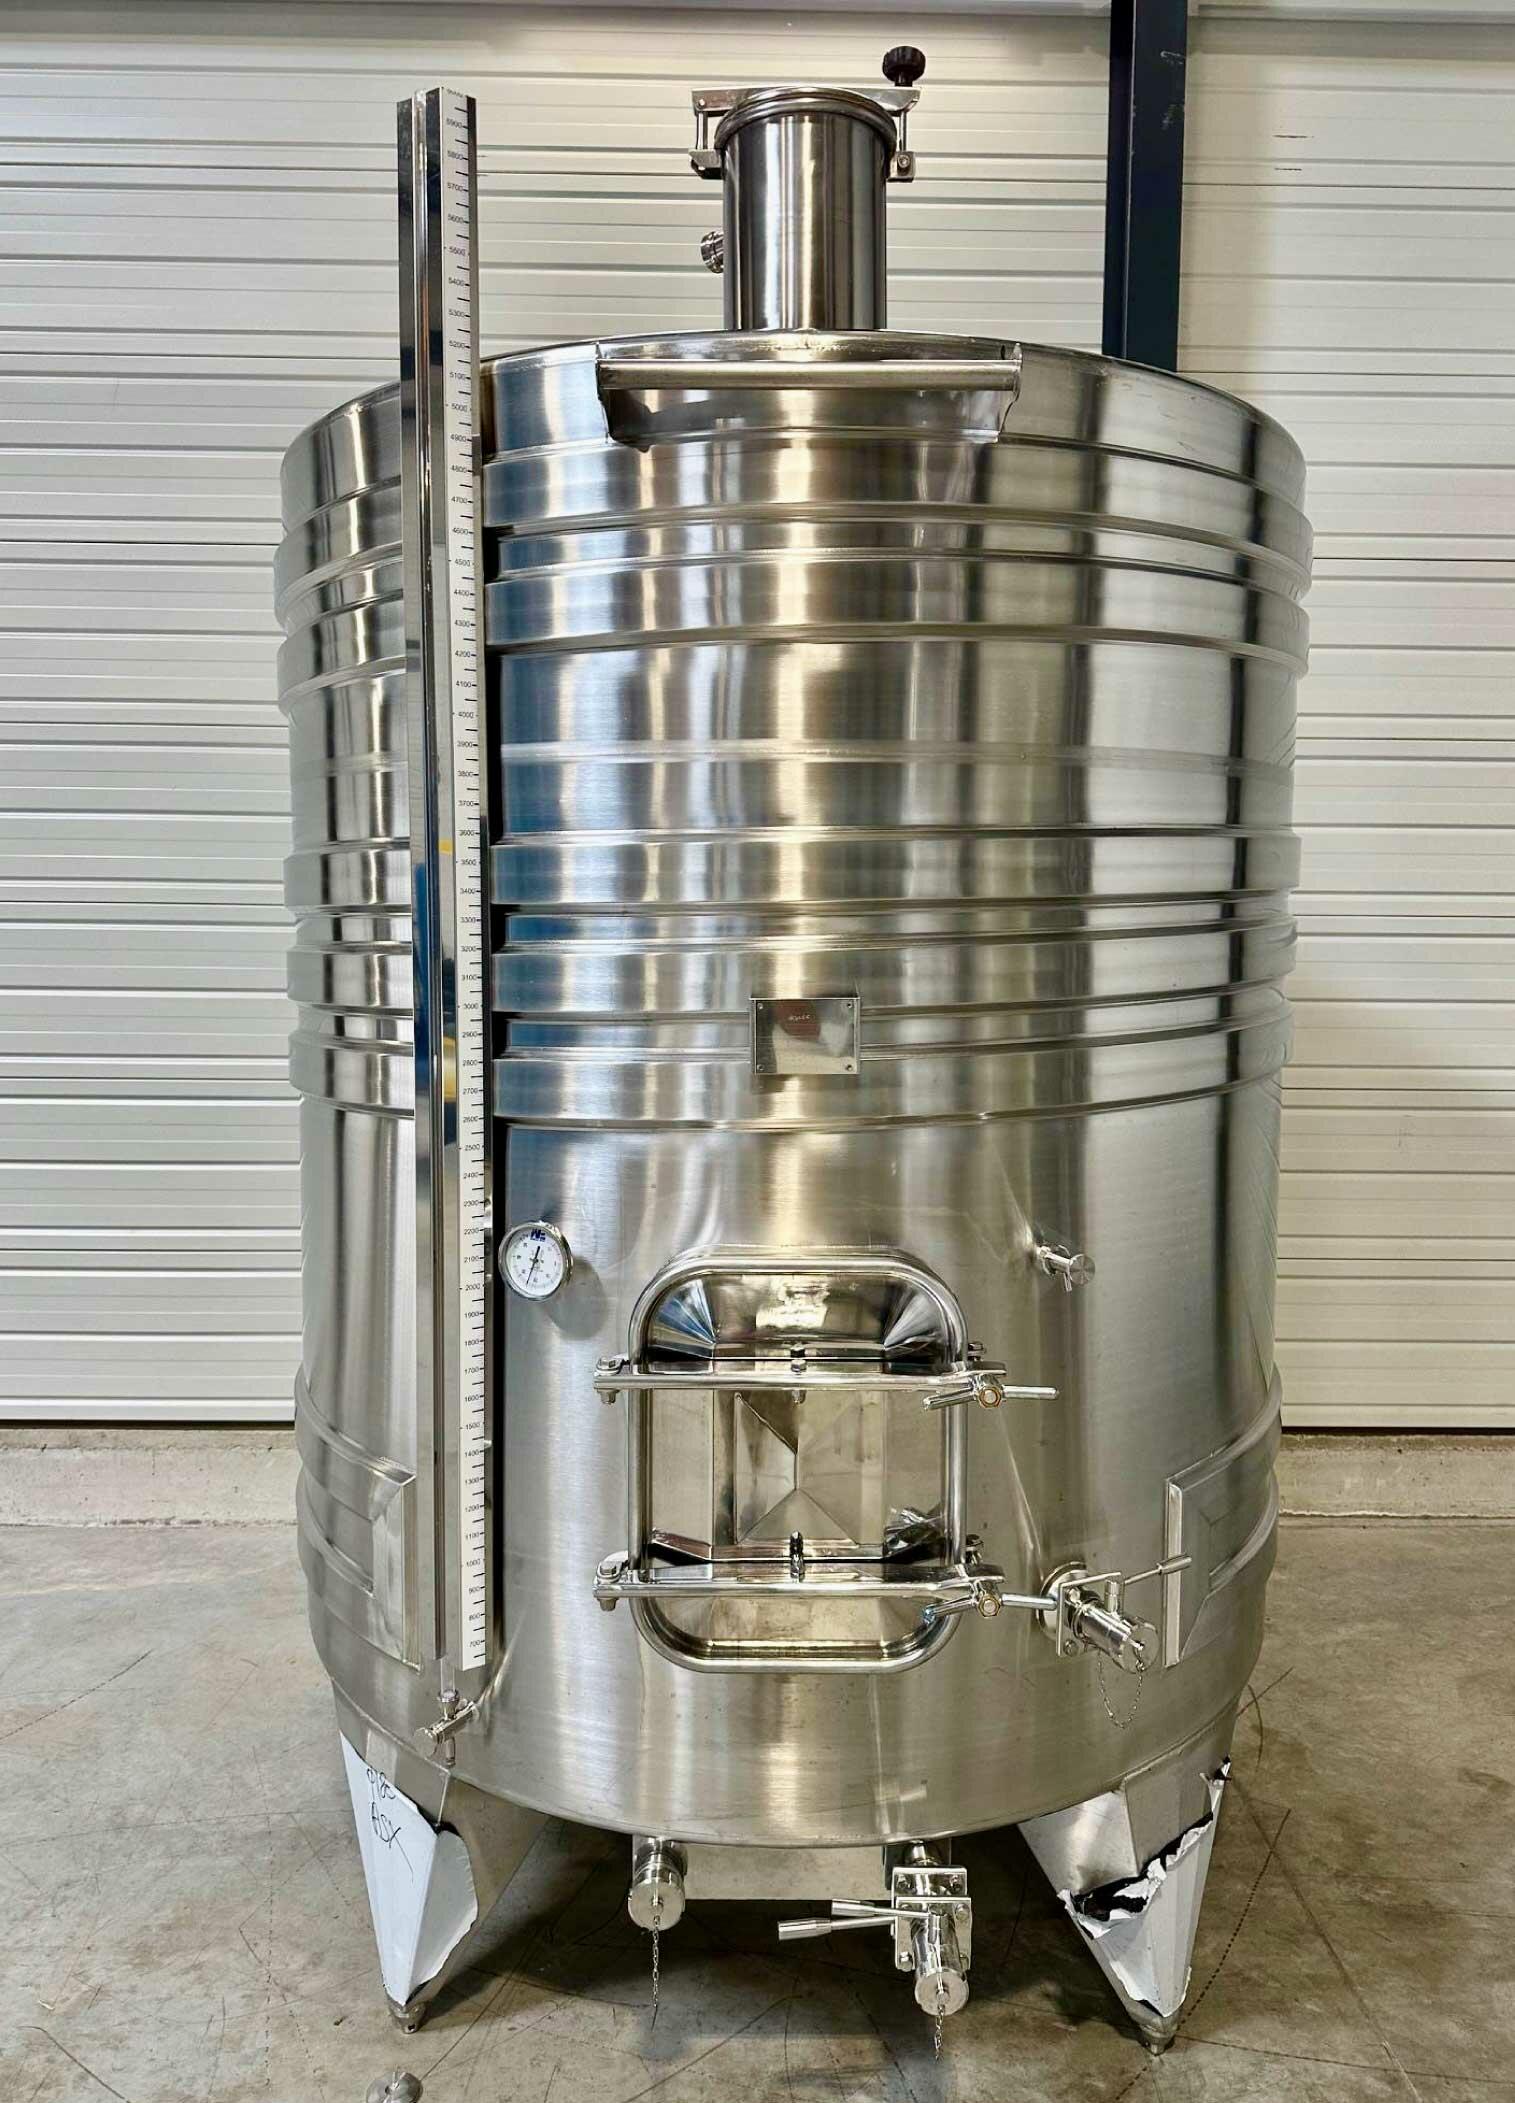 316L stainless steel tank - Coil circuit - Flat sloping bottom - Closed